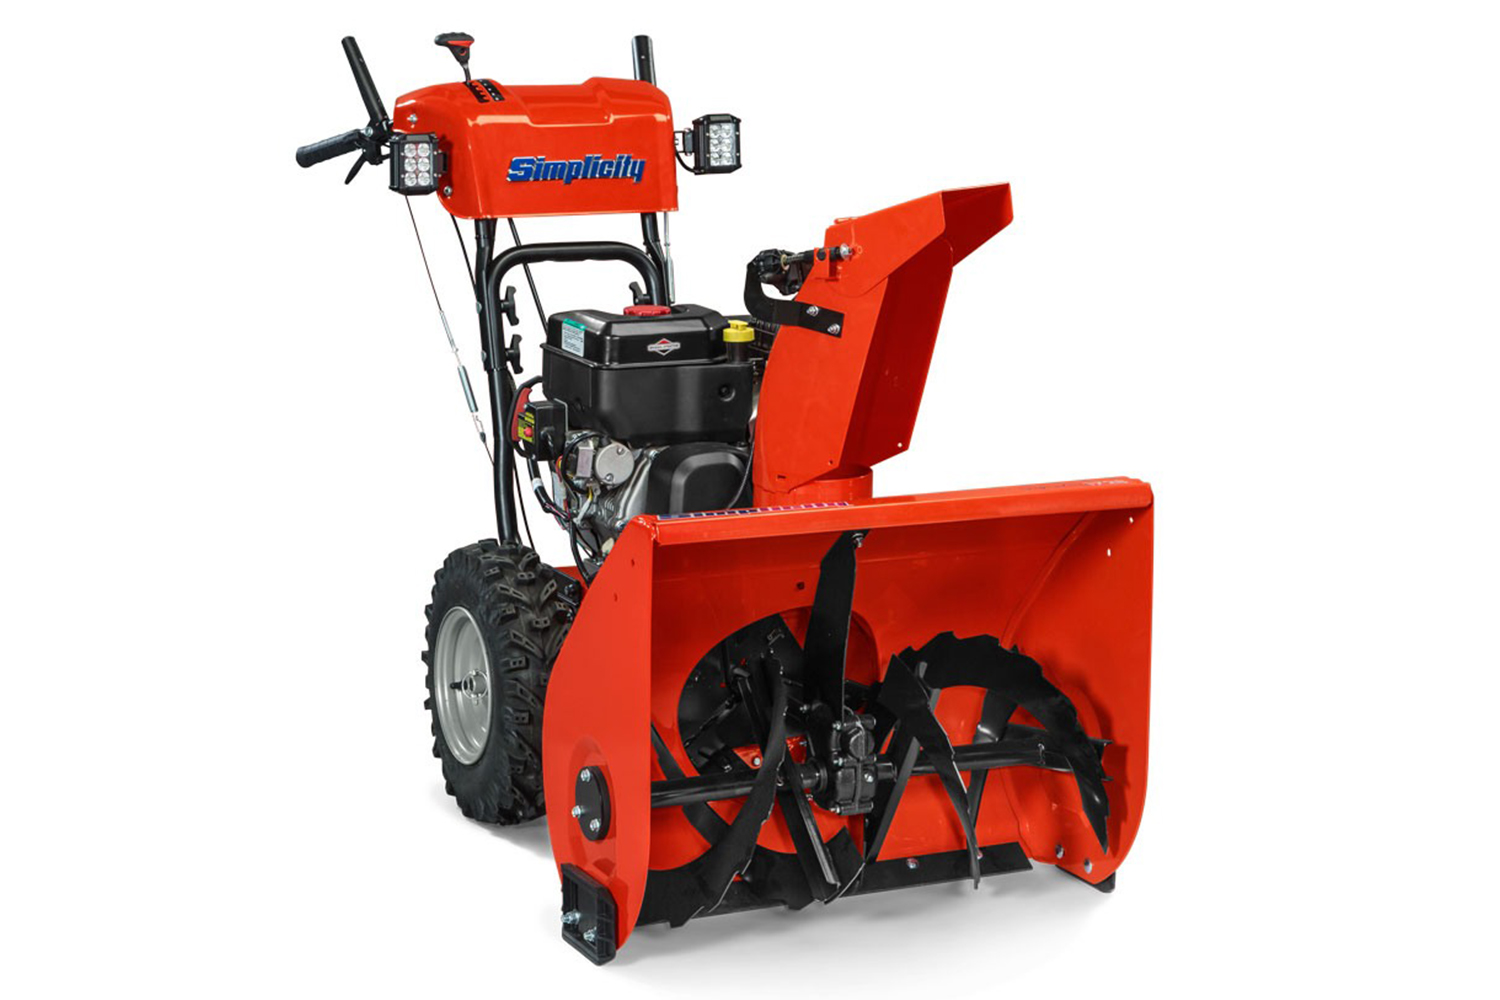 SIMPLICITY SIGNATURE SERIES DUAL-STAGE SNOW BLOWERS 2132<br/>*Model shown in image may vary.